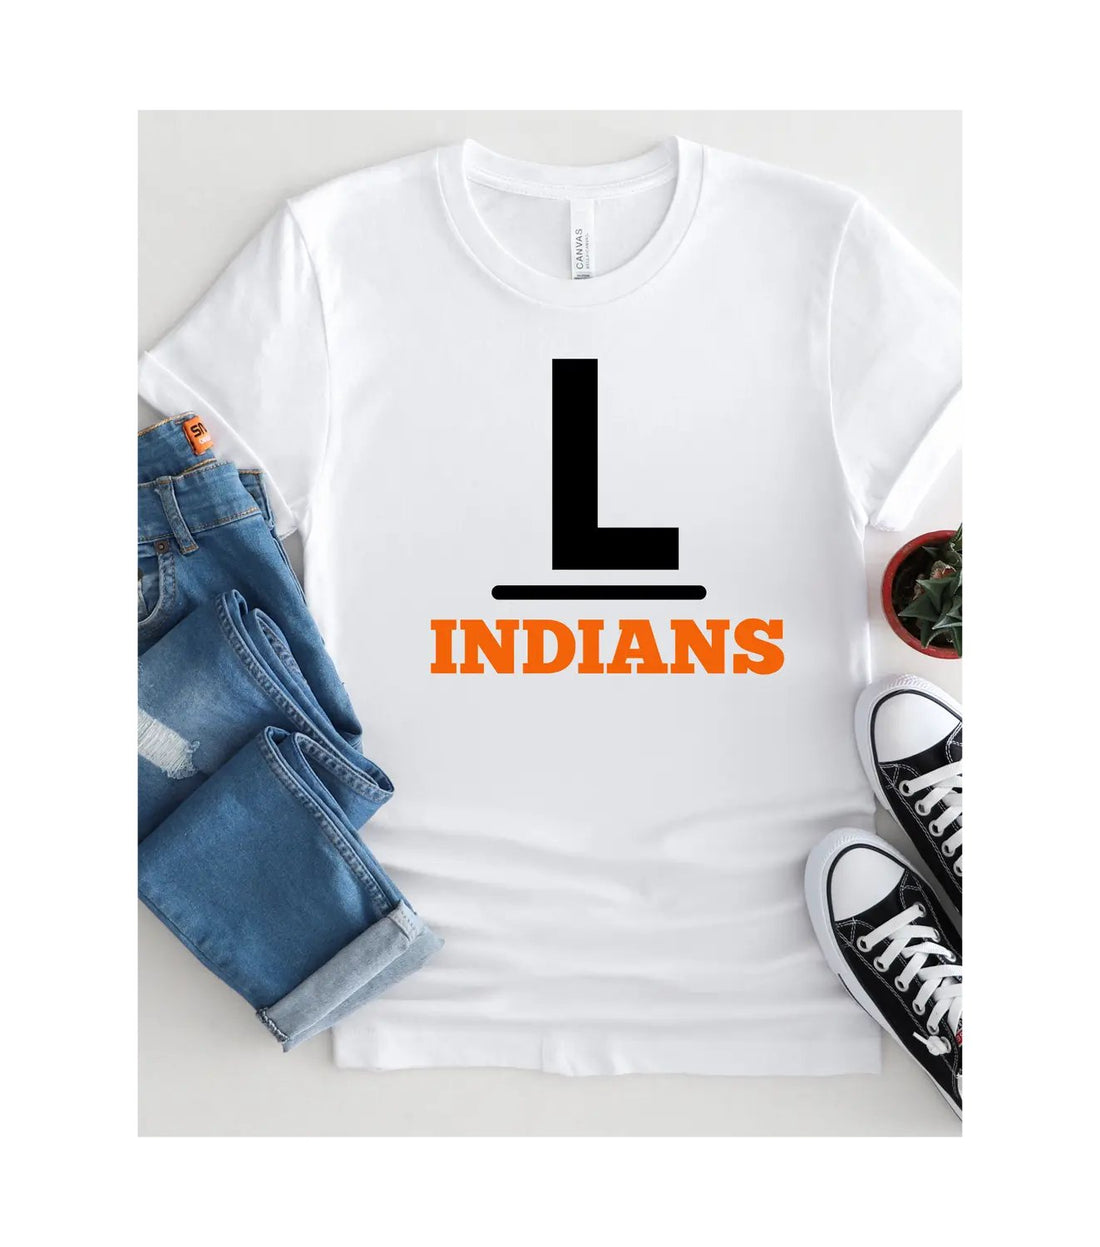 Indians - Positively Sassy